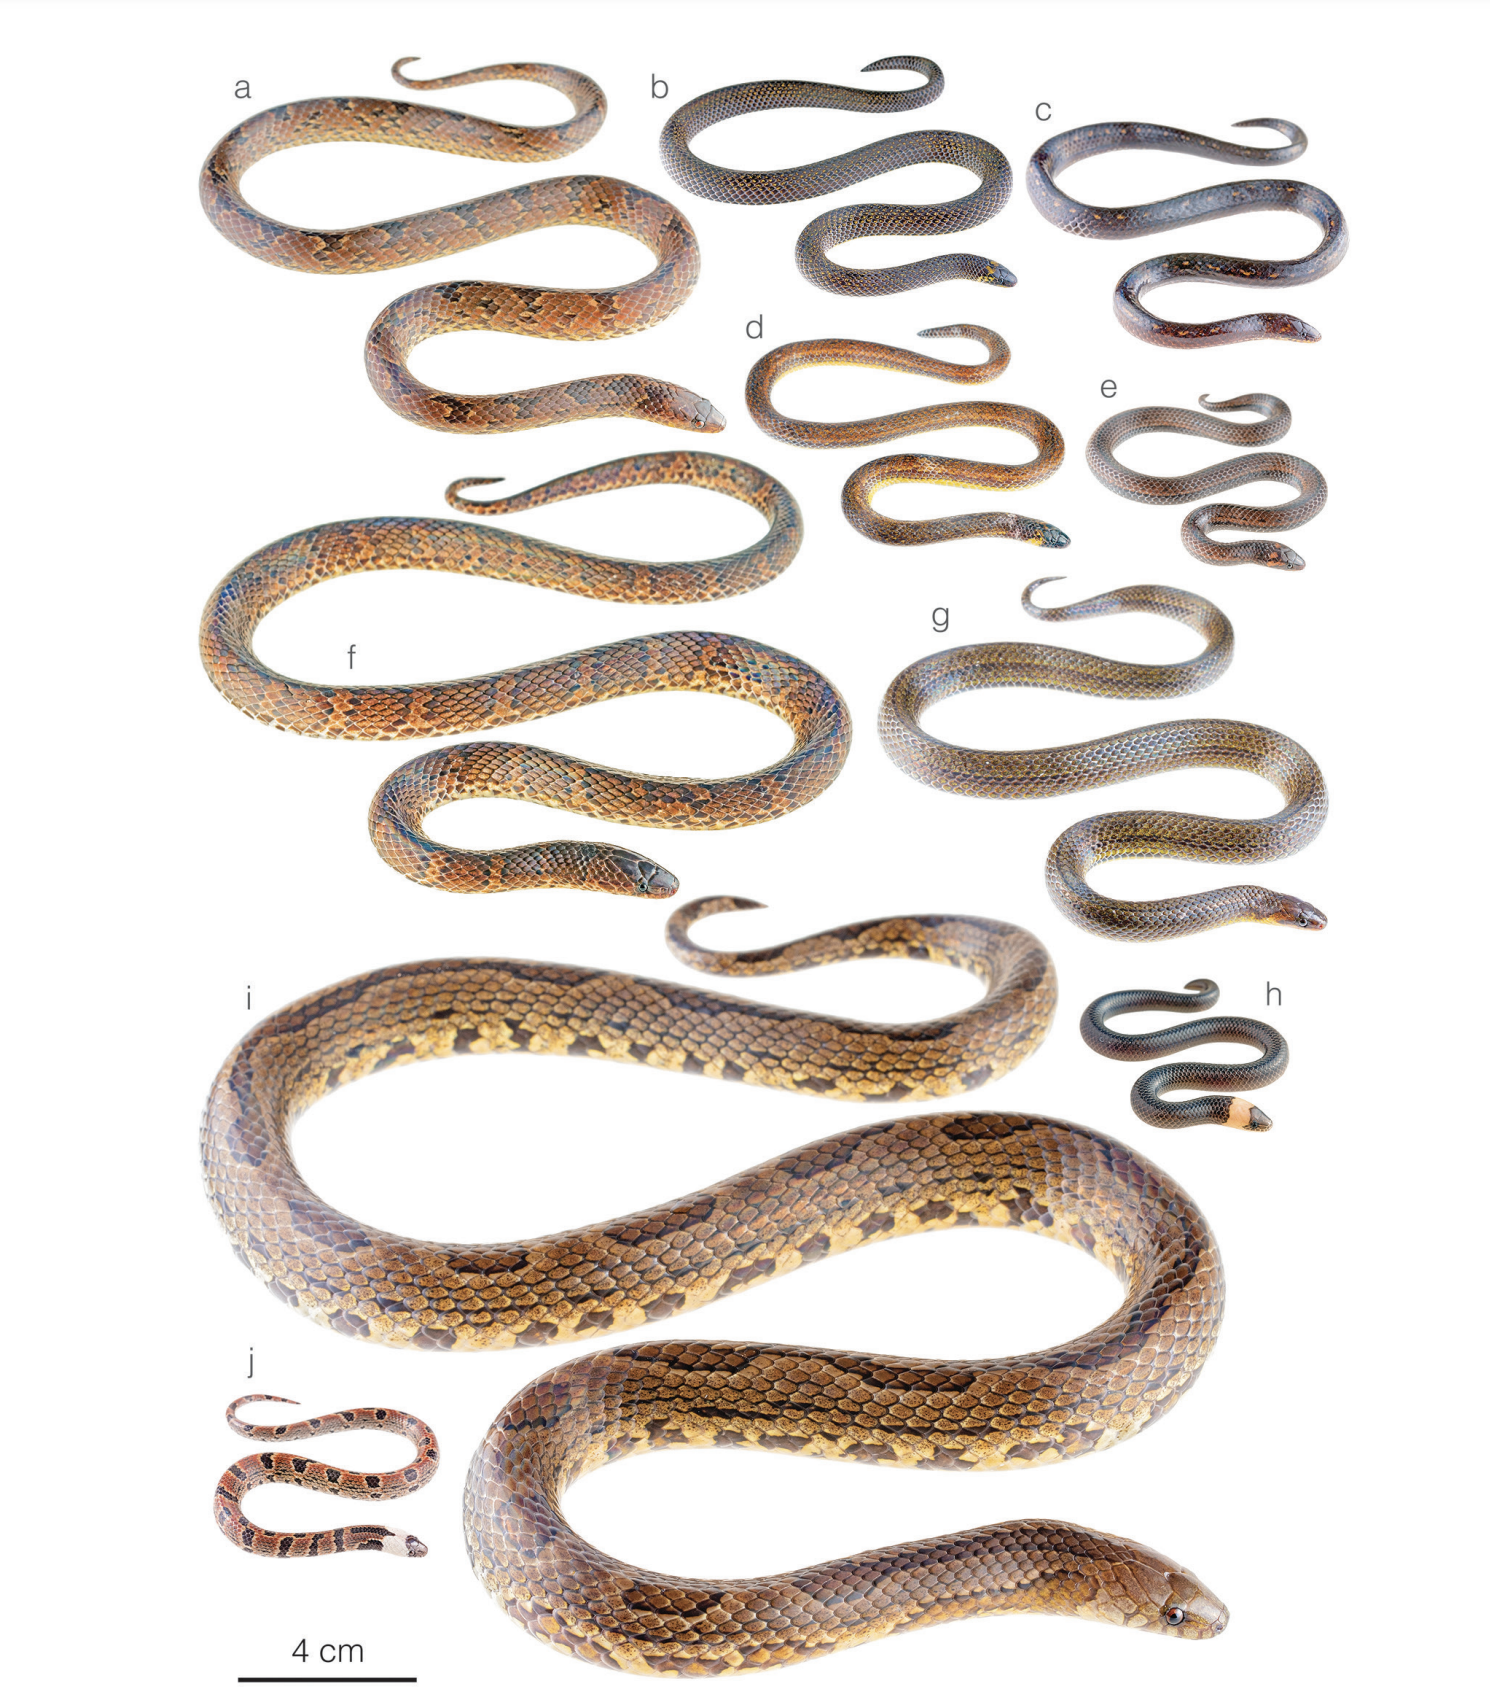 Three new species of ground snakes discovered in Ecuador.